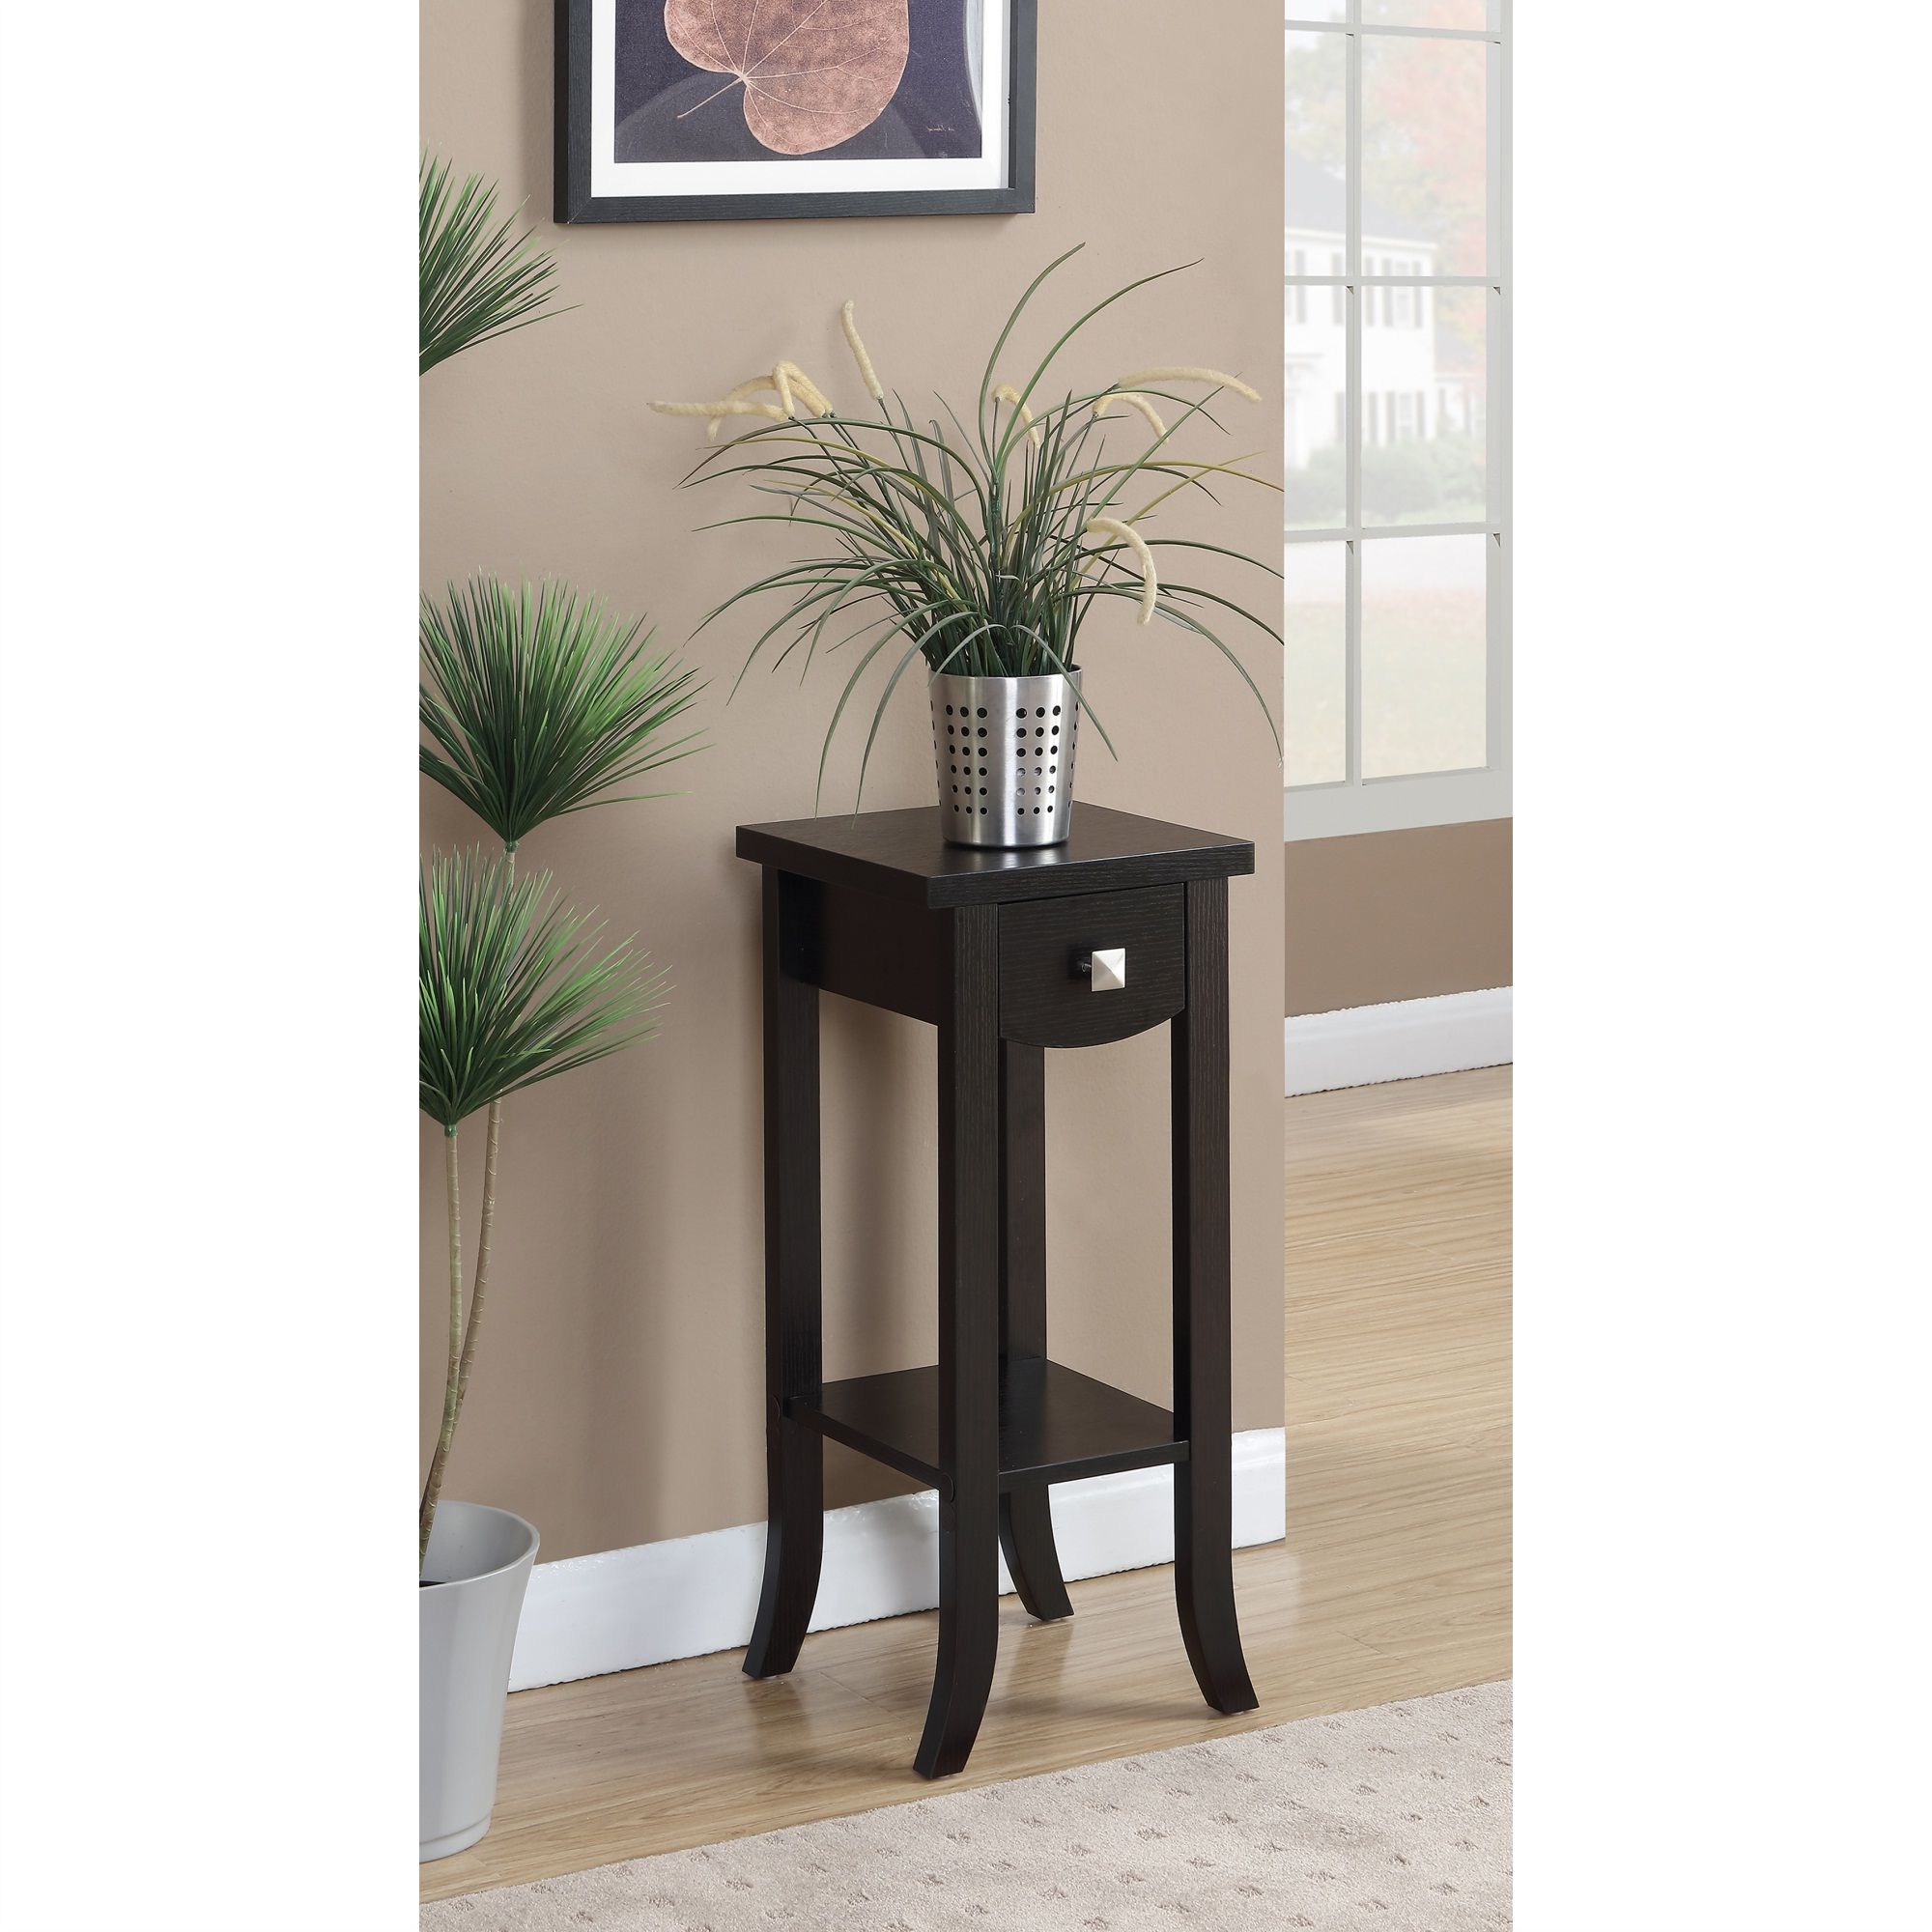 Medium Plant Stands For Famous Newport Prism Medium Plant Stand – Walmart (View 11 of 15)